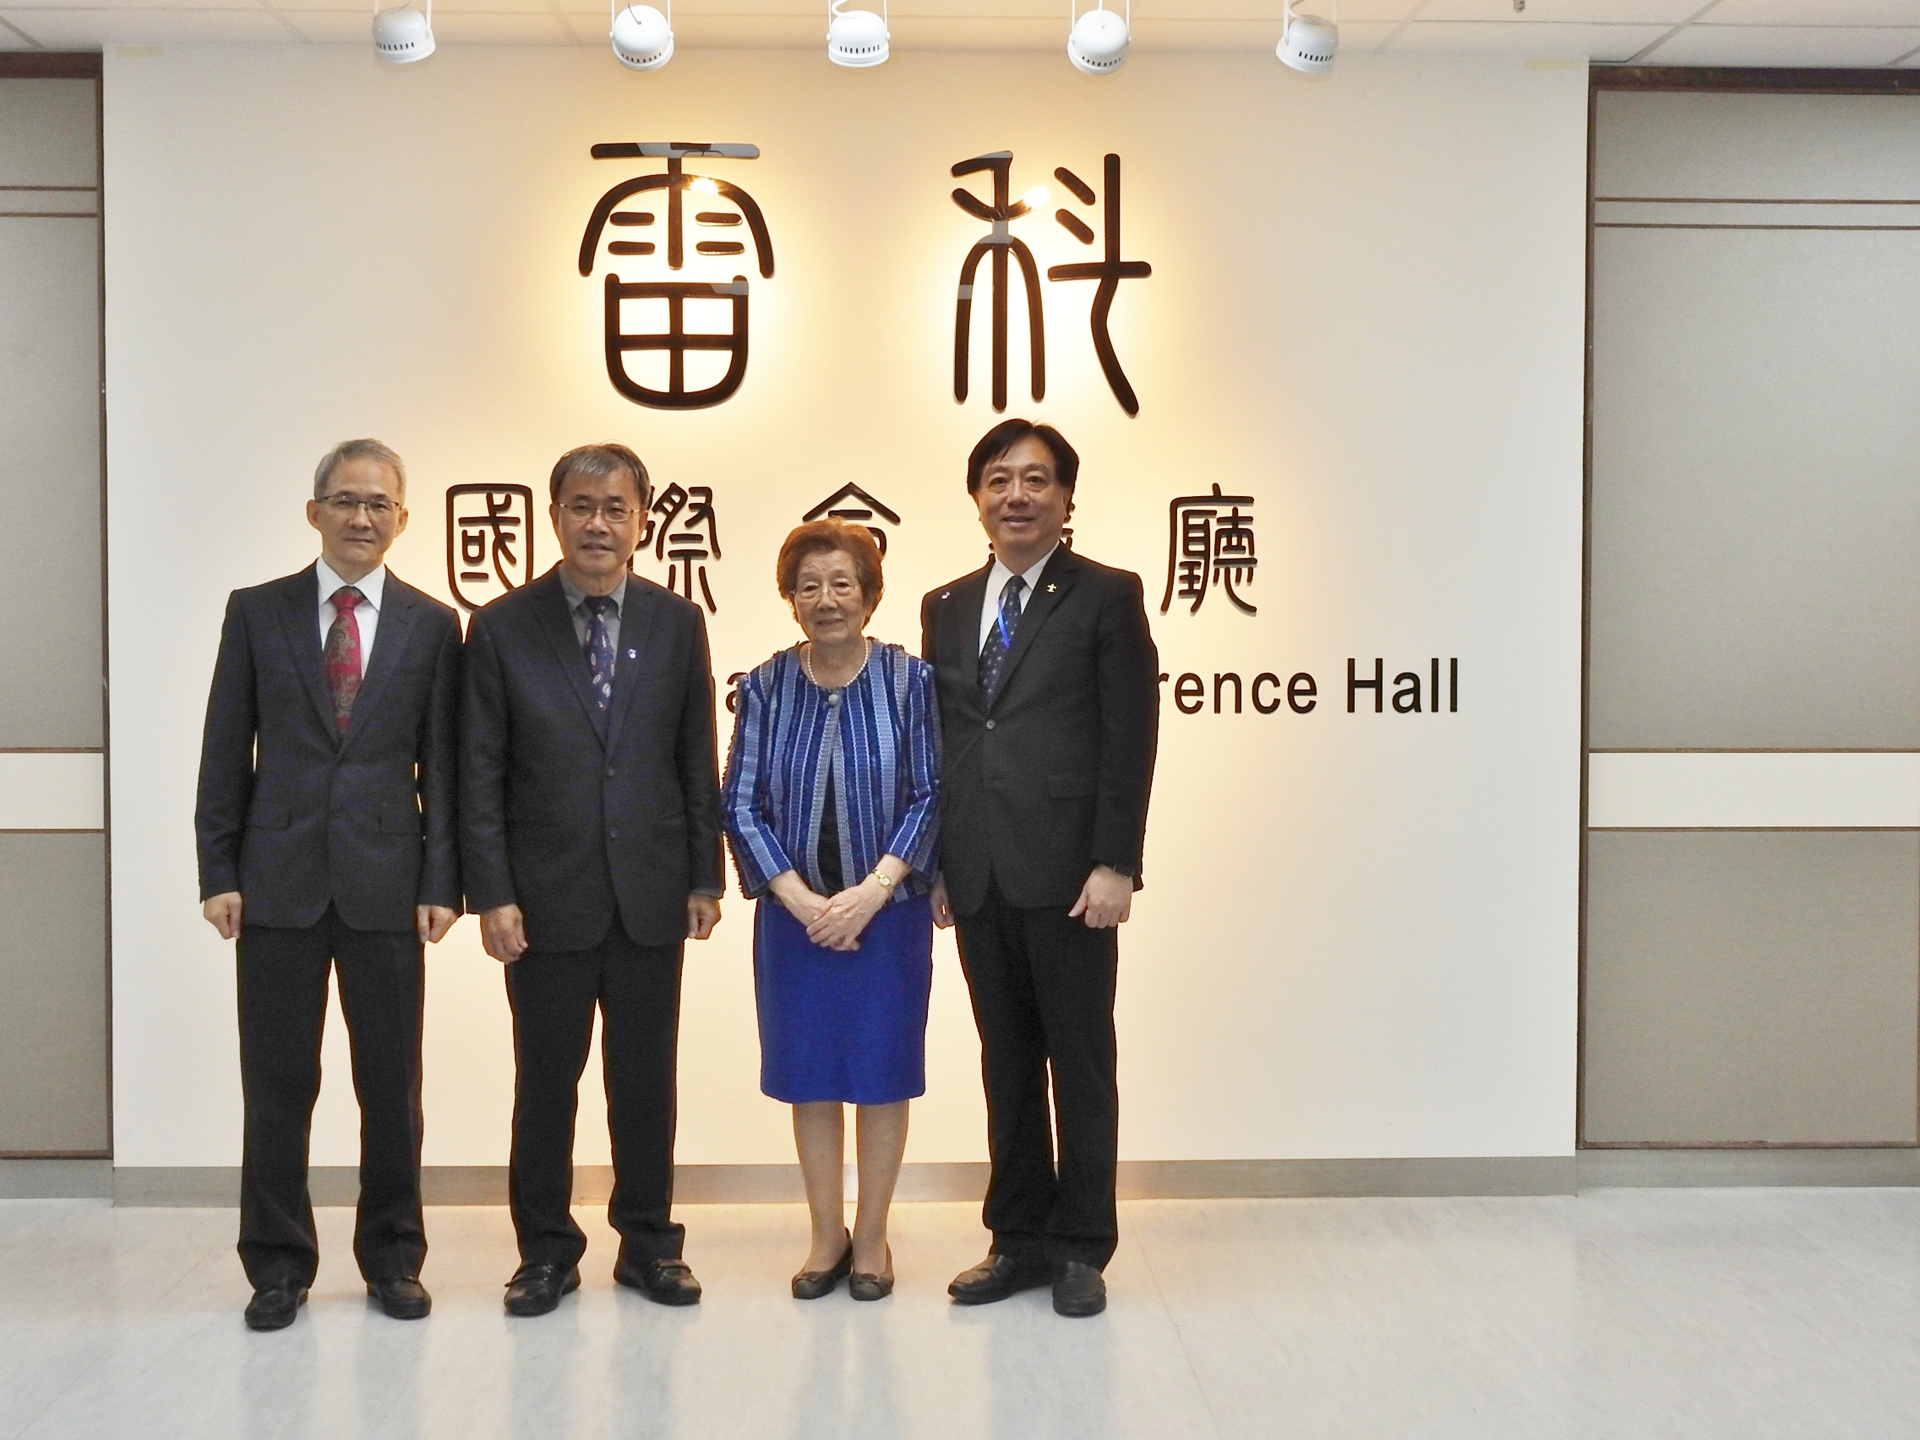 During the unveiling ceremony, Lasertek Hall was jointly unveiled by (from left) Dean San-Yih Hwang, President Ying- Yao Cheng, Chairman Tsai-Hsing Cheng’s  mother, and Chairman Tsai-Hsing Cheng together.